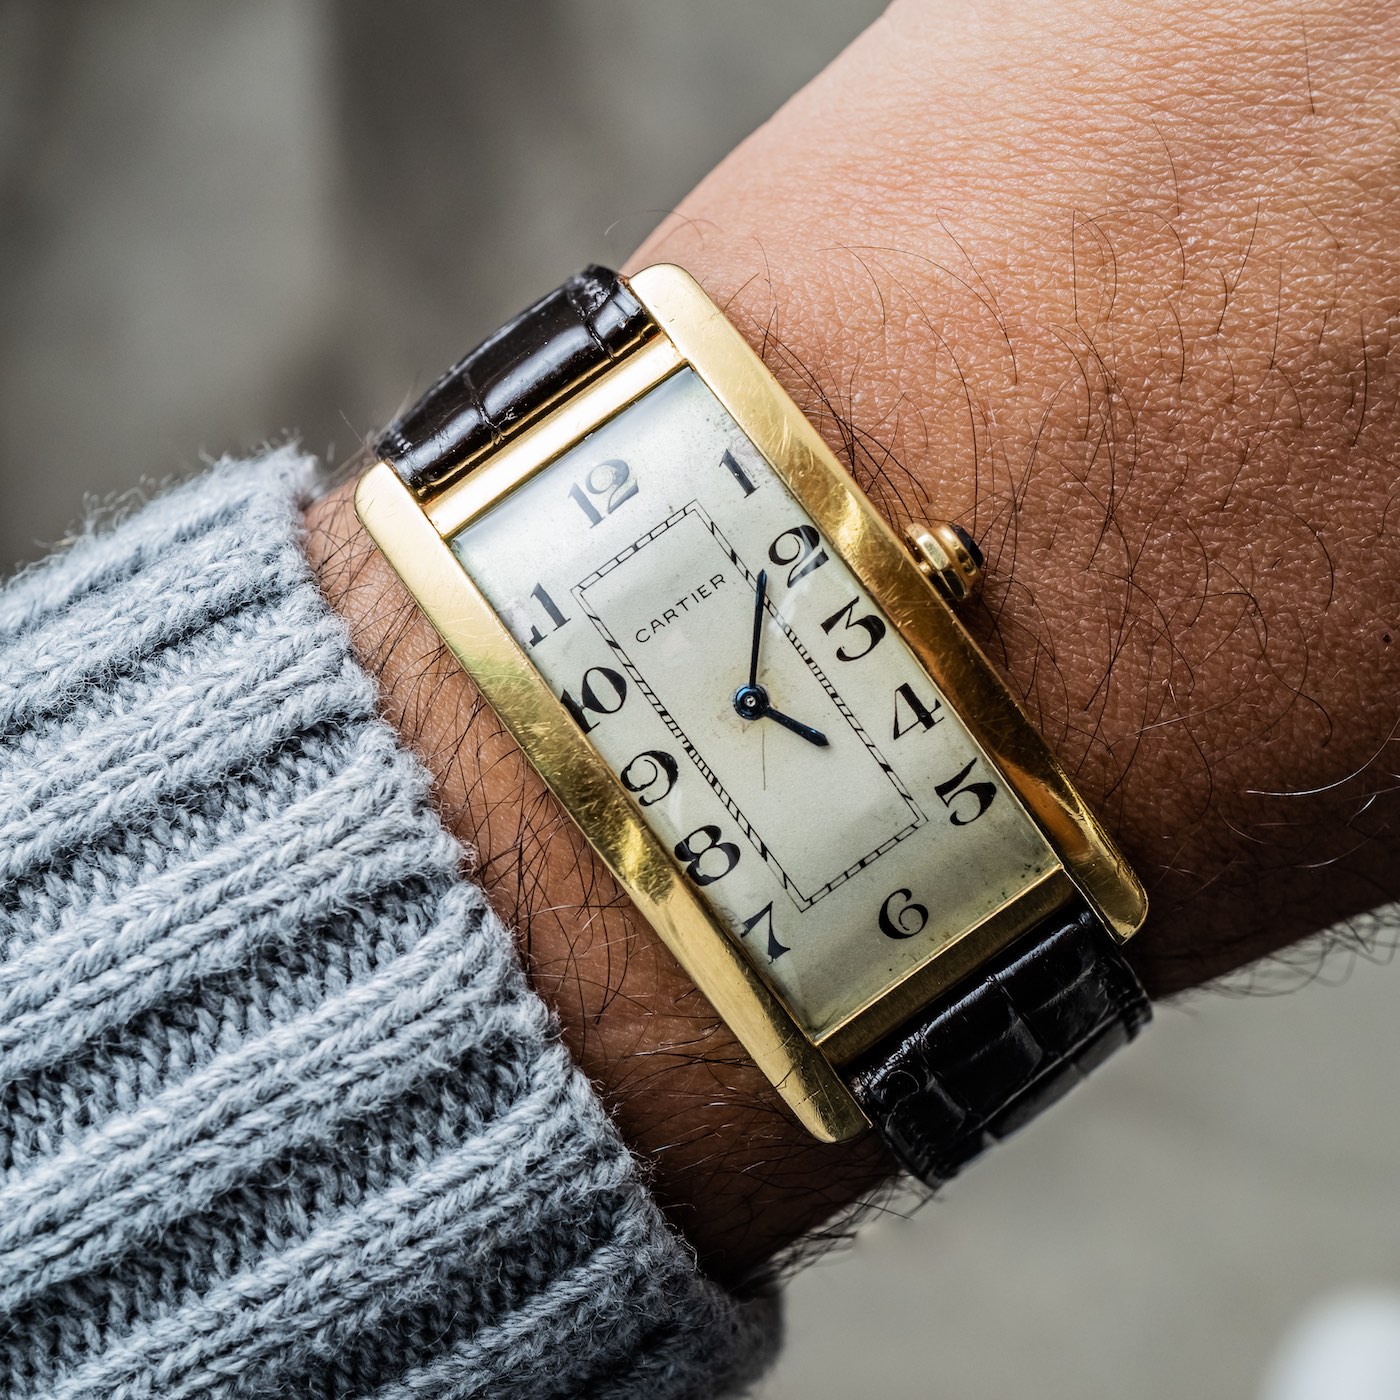 Hands On Vintage Cartier Watches From Harry Fane Exhibition At Dover Street Market Los Angeles Now Through February 19th Ablogtowatch